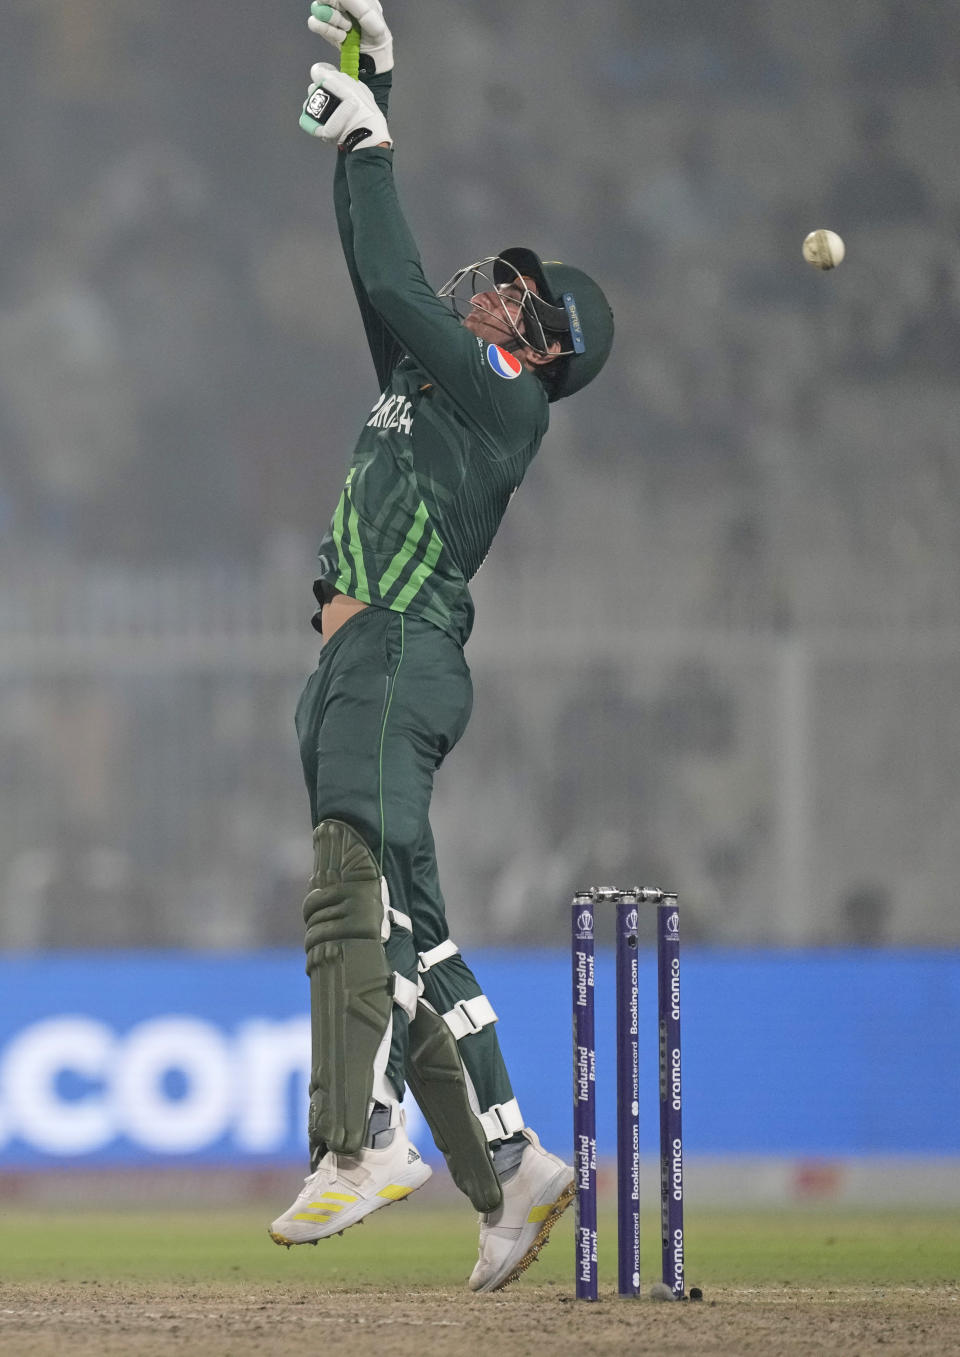 Pakistan's Mohammad Wasim reaches for a rising delivery during the ICC Men's Cricket World Cup match between Pakistan and England in Kolkata, India, Saturday, Nov. 11, 2023. (AP Photo/Bikas Das)